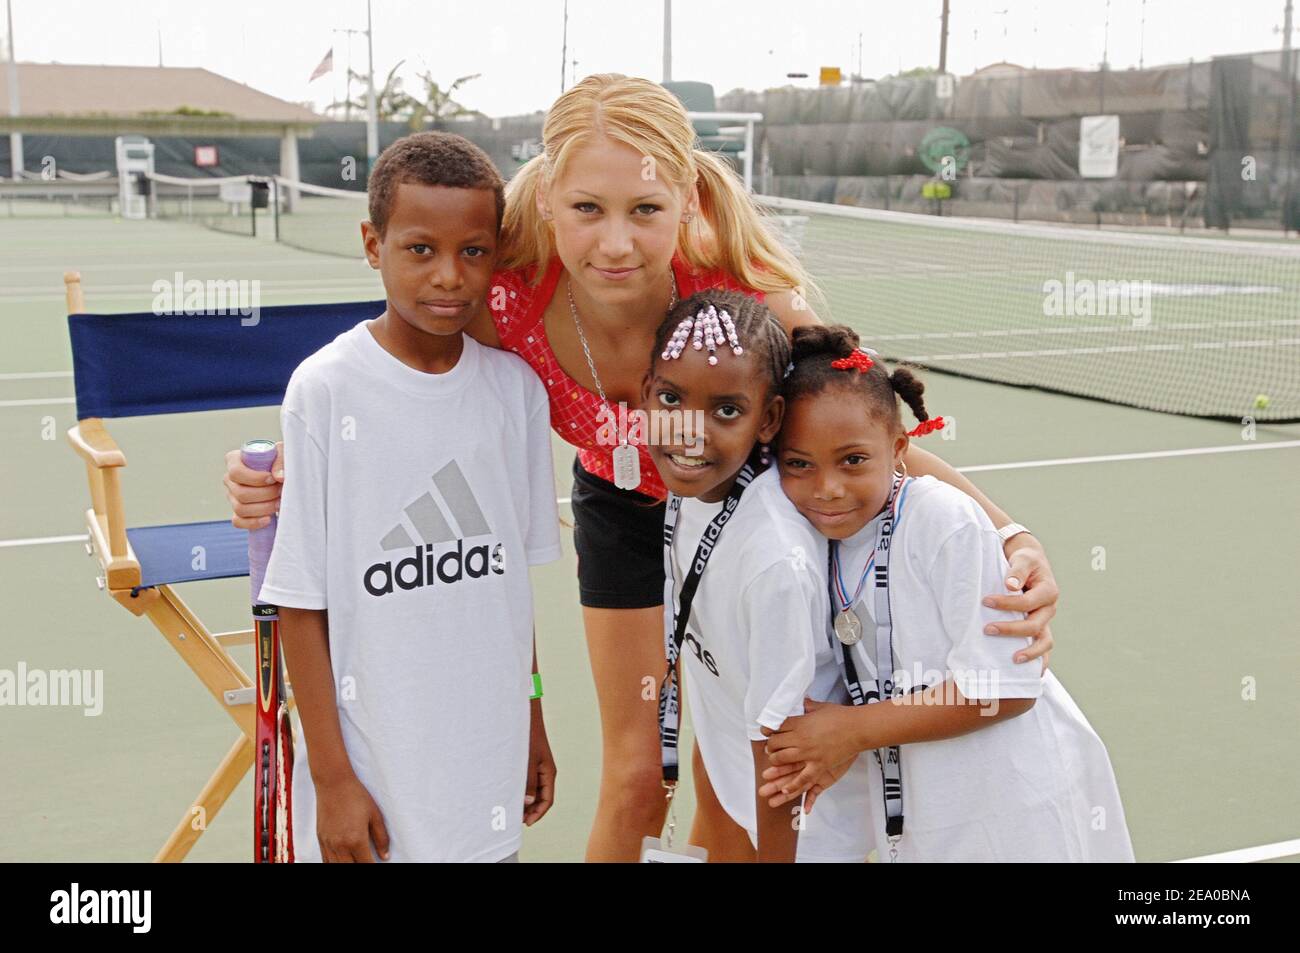 Russian Tennis player Anna Kournikova plays with young kids during the ' Adidas Clinic' in Miami, Florida, on March 21, 2005. Photo by Corinne  Dubreuil/CAMELEON/ABACA Stock Photo - Alamy